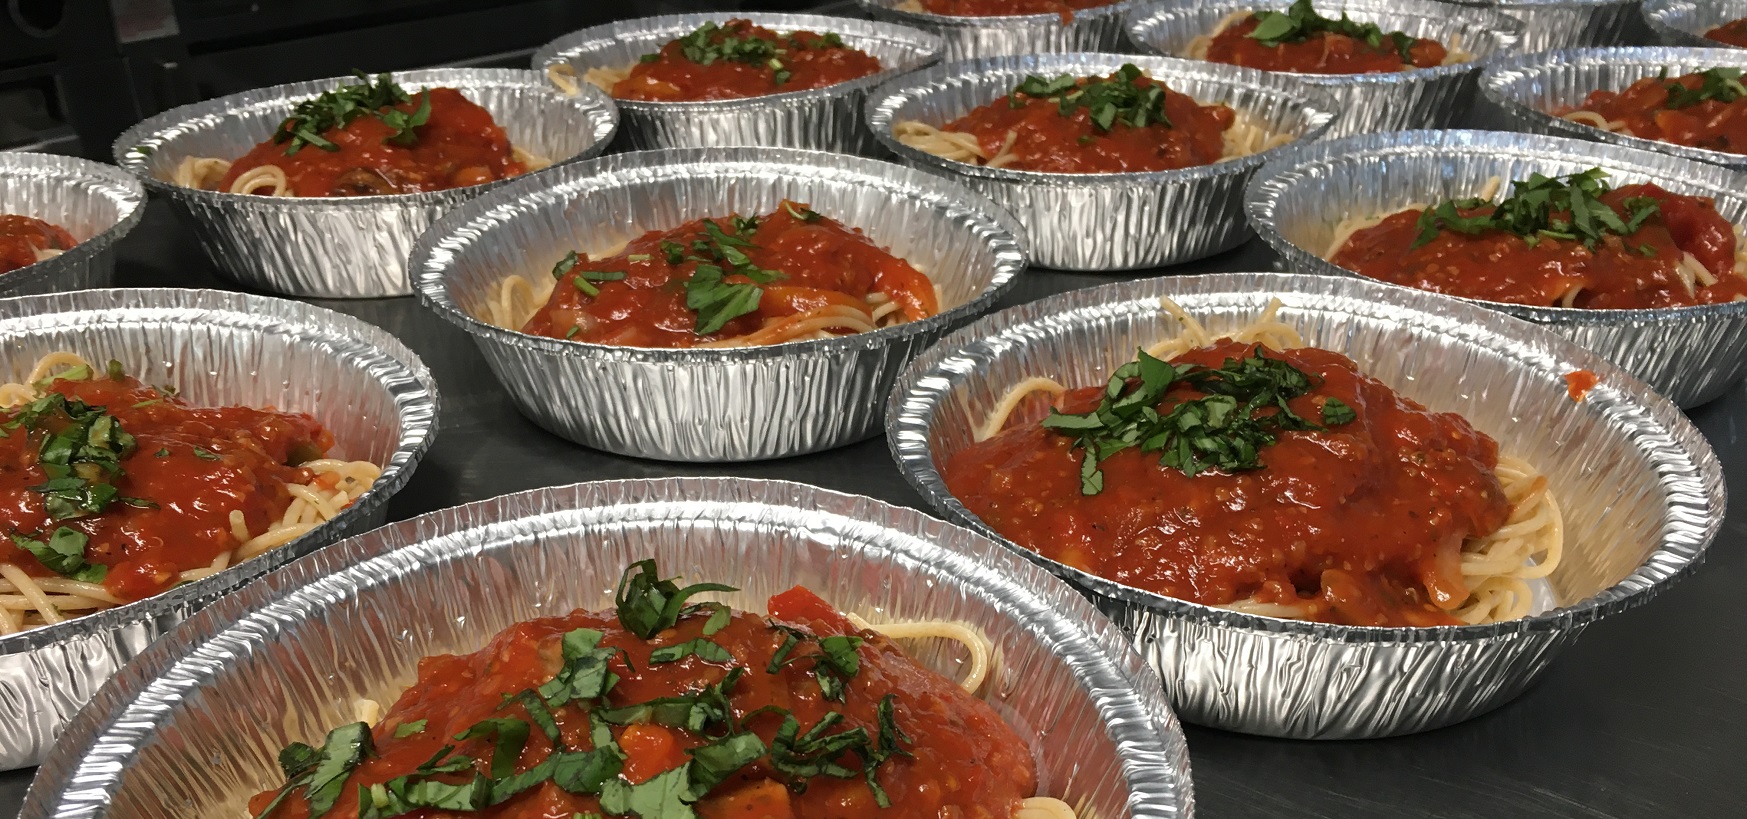 prepared meals to be delivered to vulnerable communities in Peel and York Regions